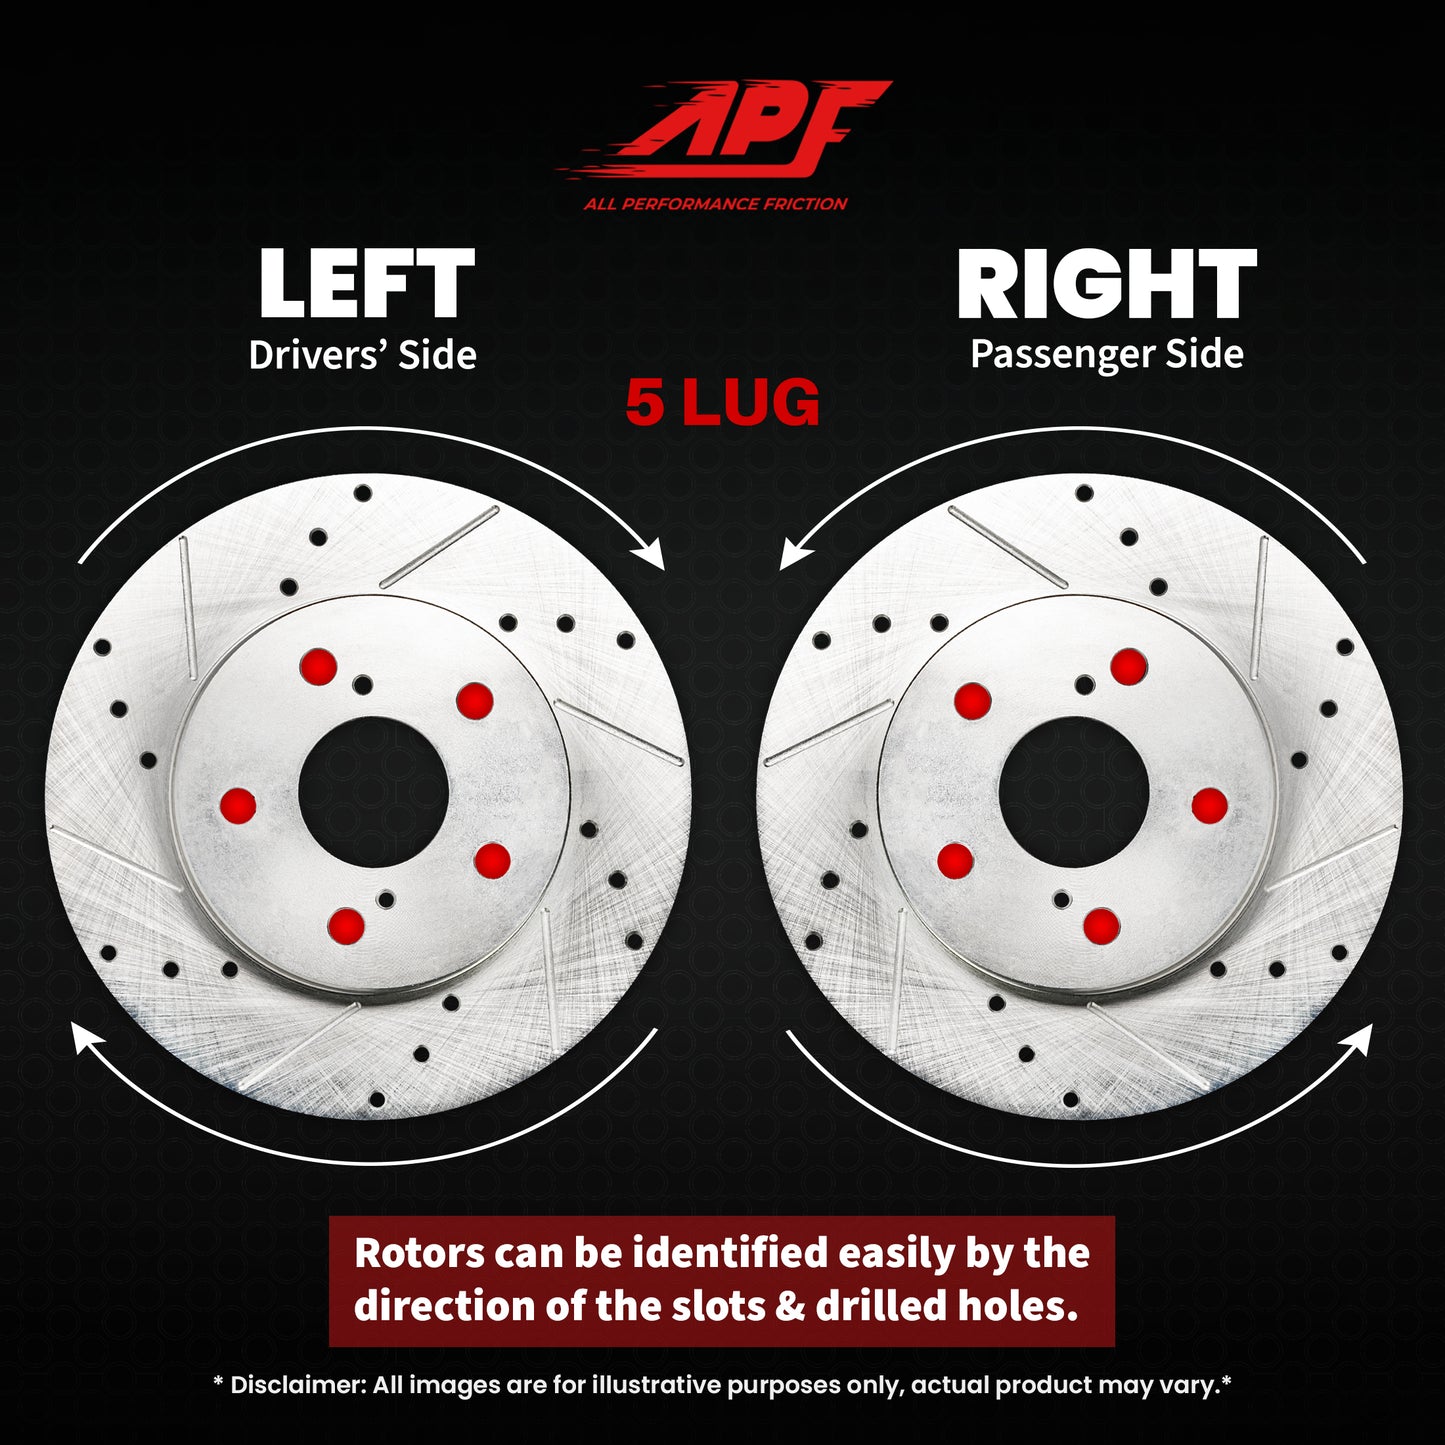 APF All Performance Friction Front and Rear Rotors and Pads Full Kit compatible with Nissan 370Z 2009-2019 Zinc Drilled Slotted Rotors with Ceramic Carbon Fiber Brake Pads | $722.96